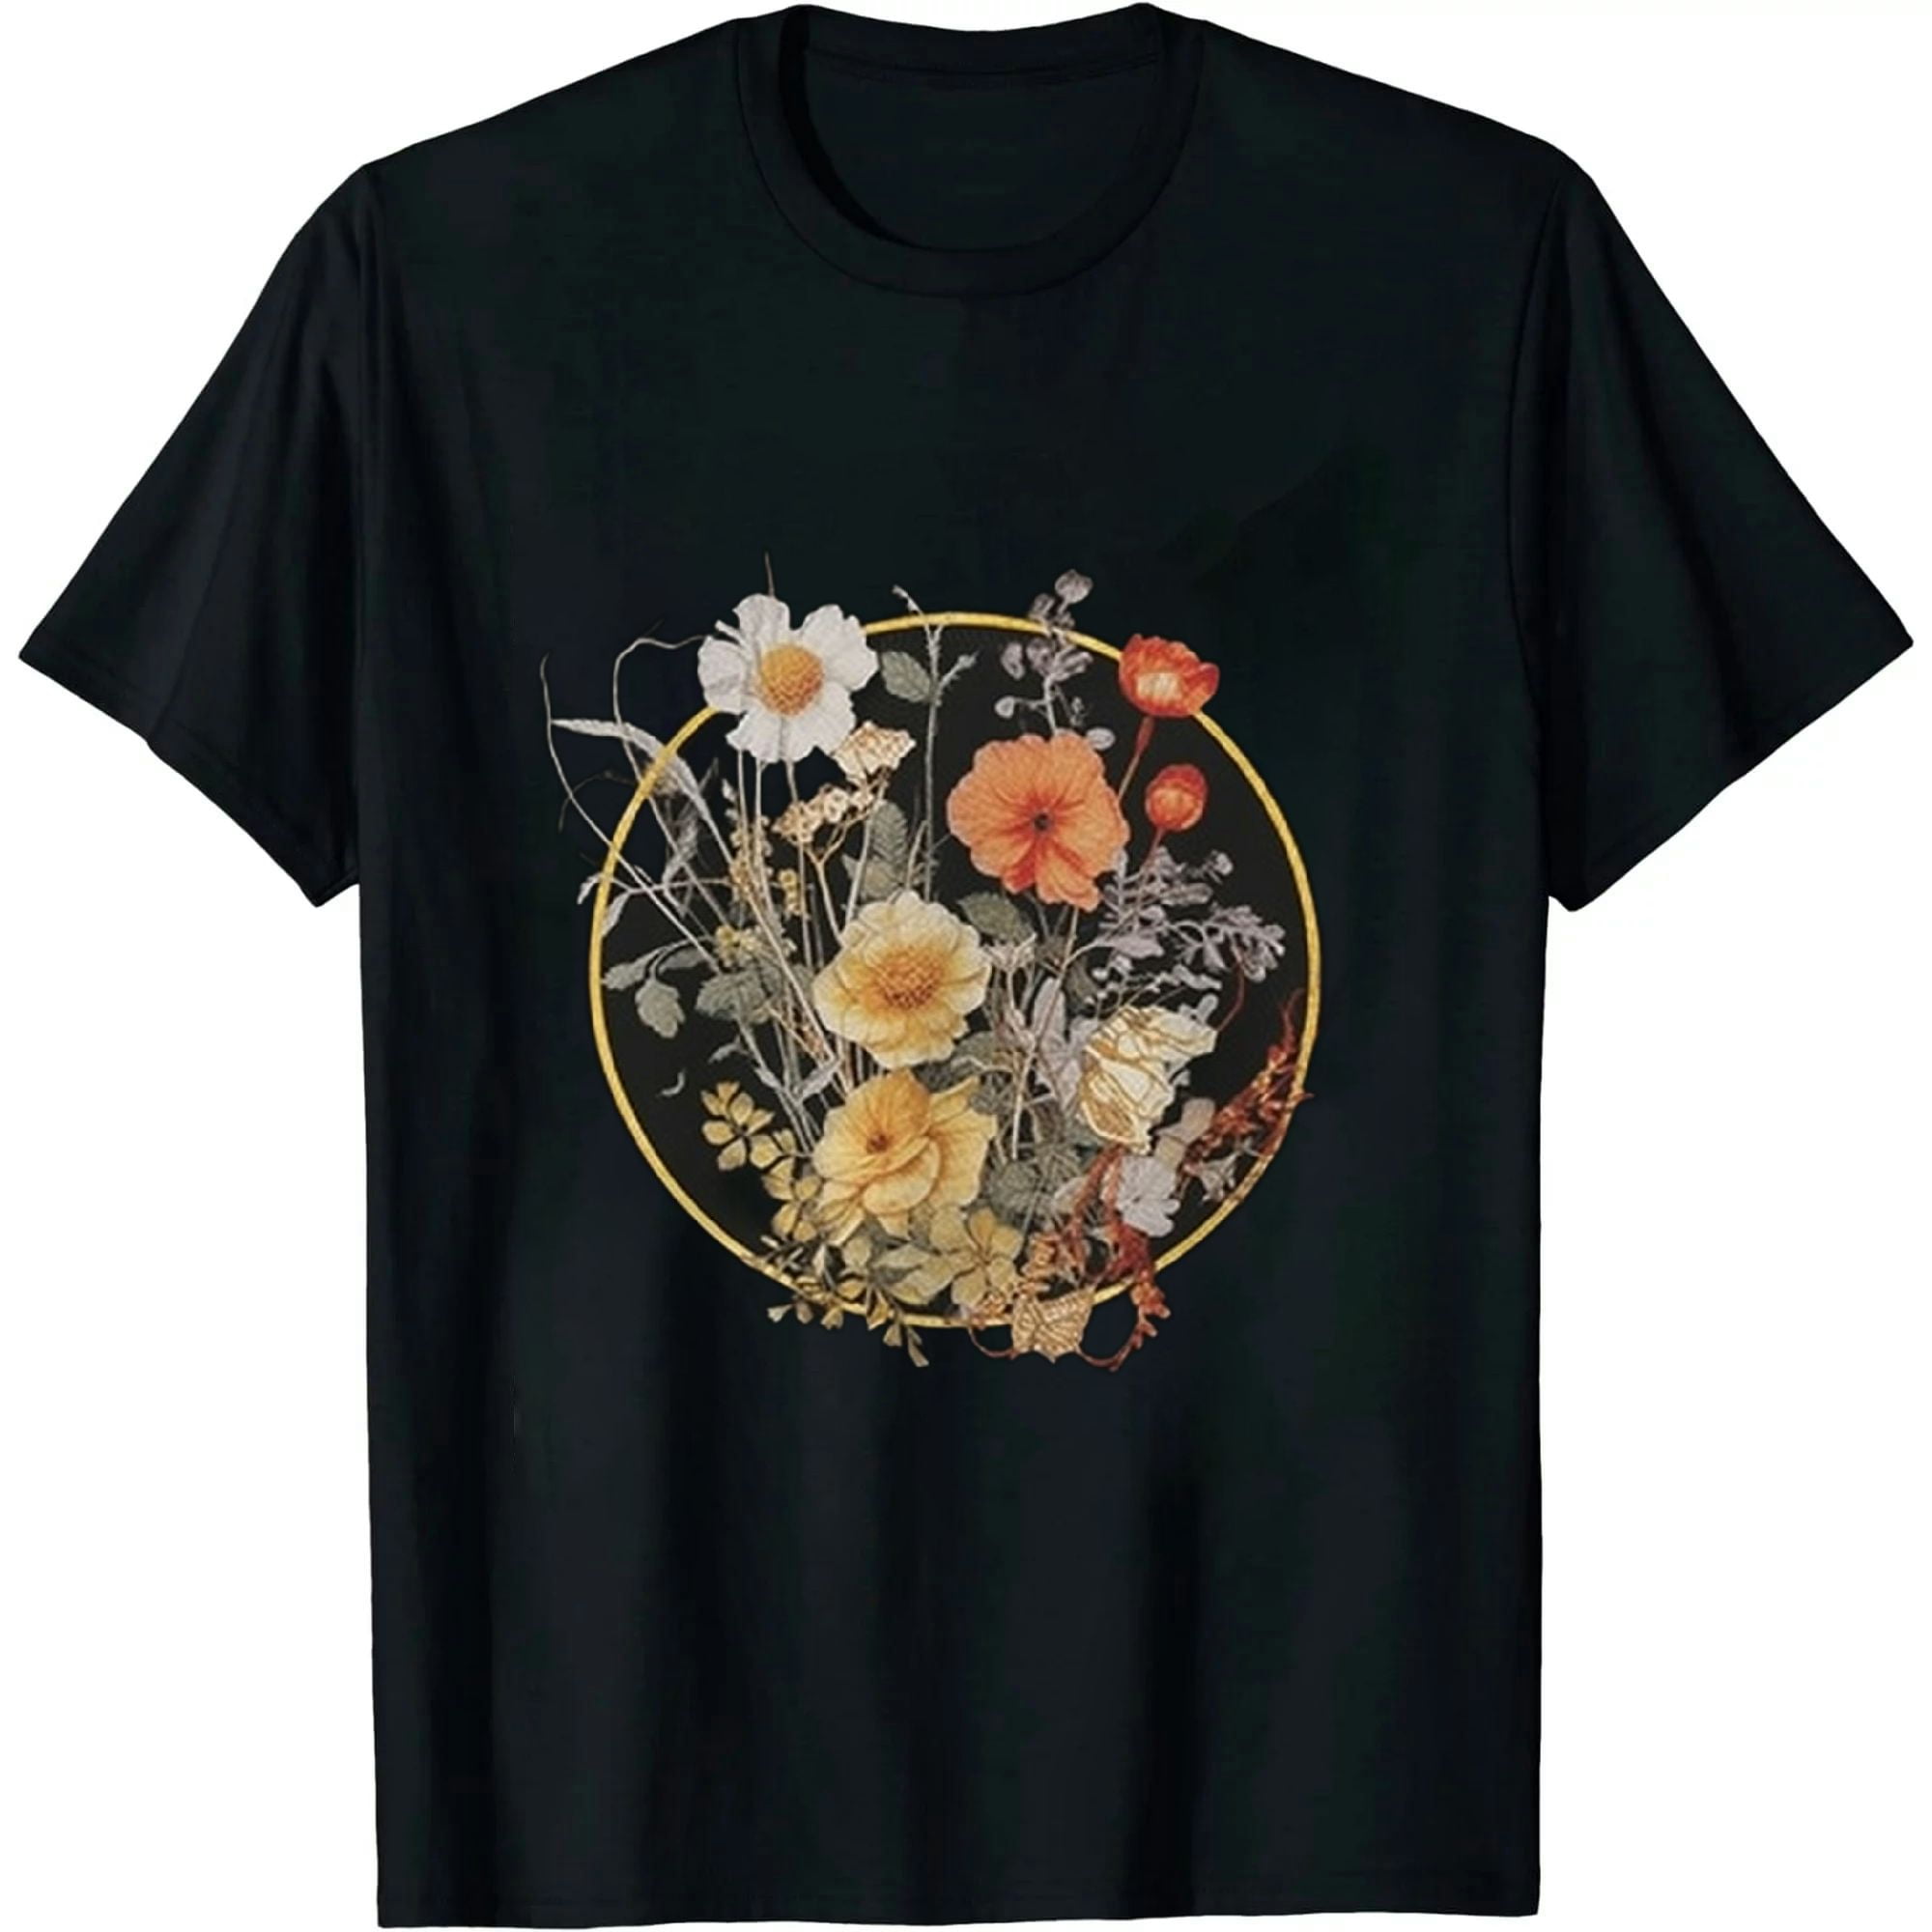 MAXPRESS Flower Shirts for Women Boho Wildflower T-Shirt Floral Graphic ...